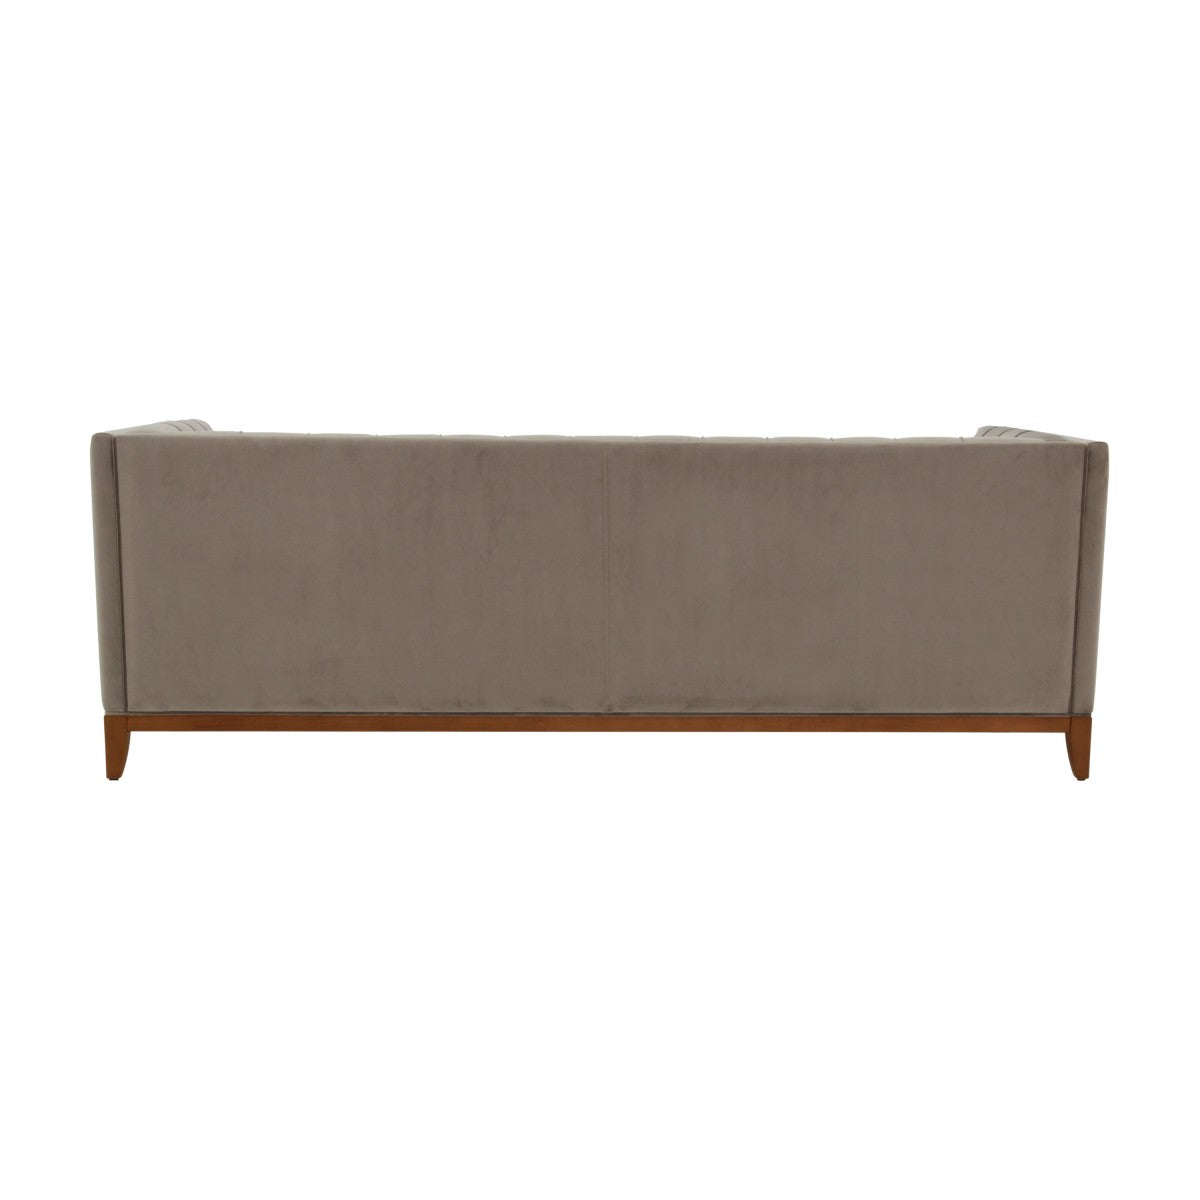 Lixis Bespoke Upholstered Modern Style Four Seater Sofa MS9472F Custom Made To Order